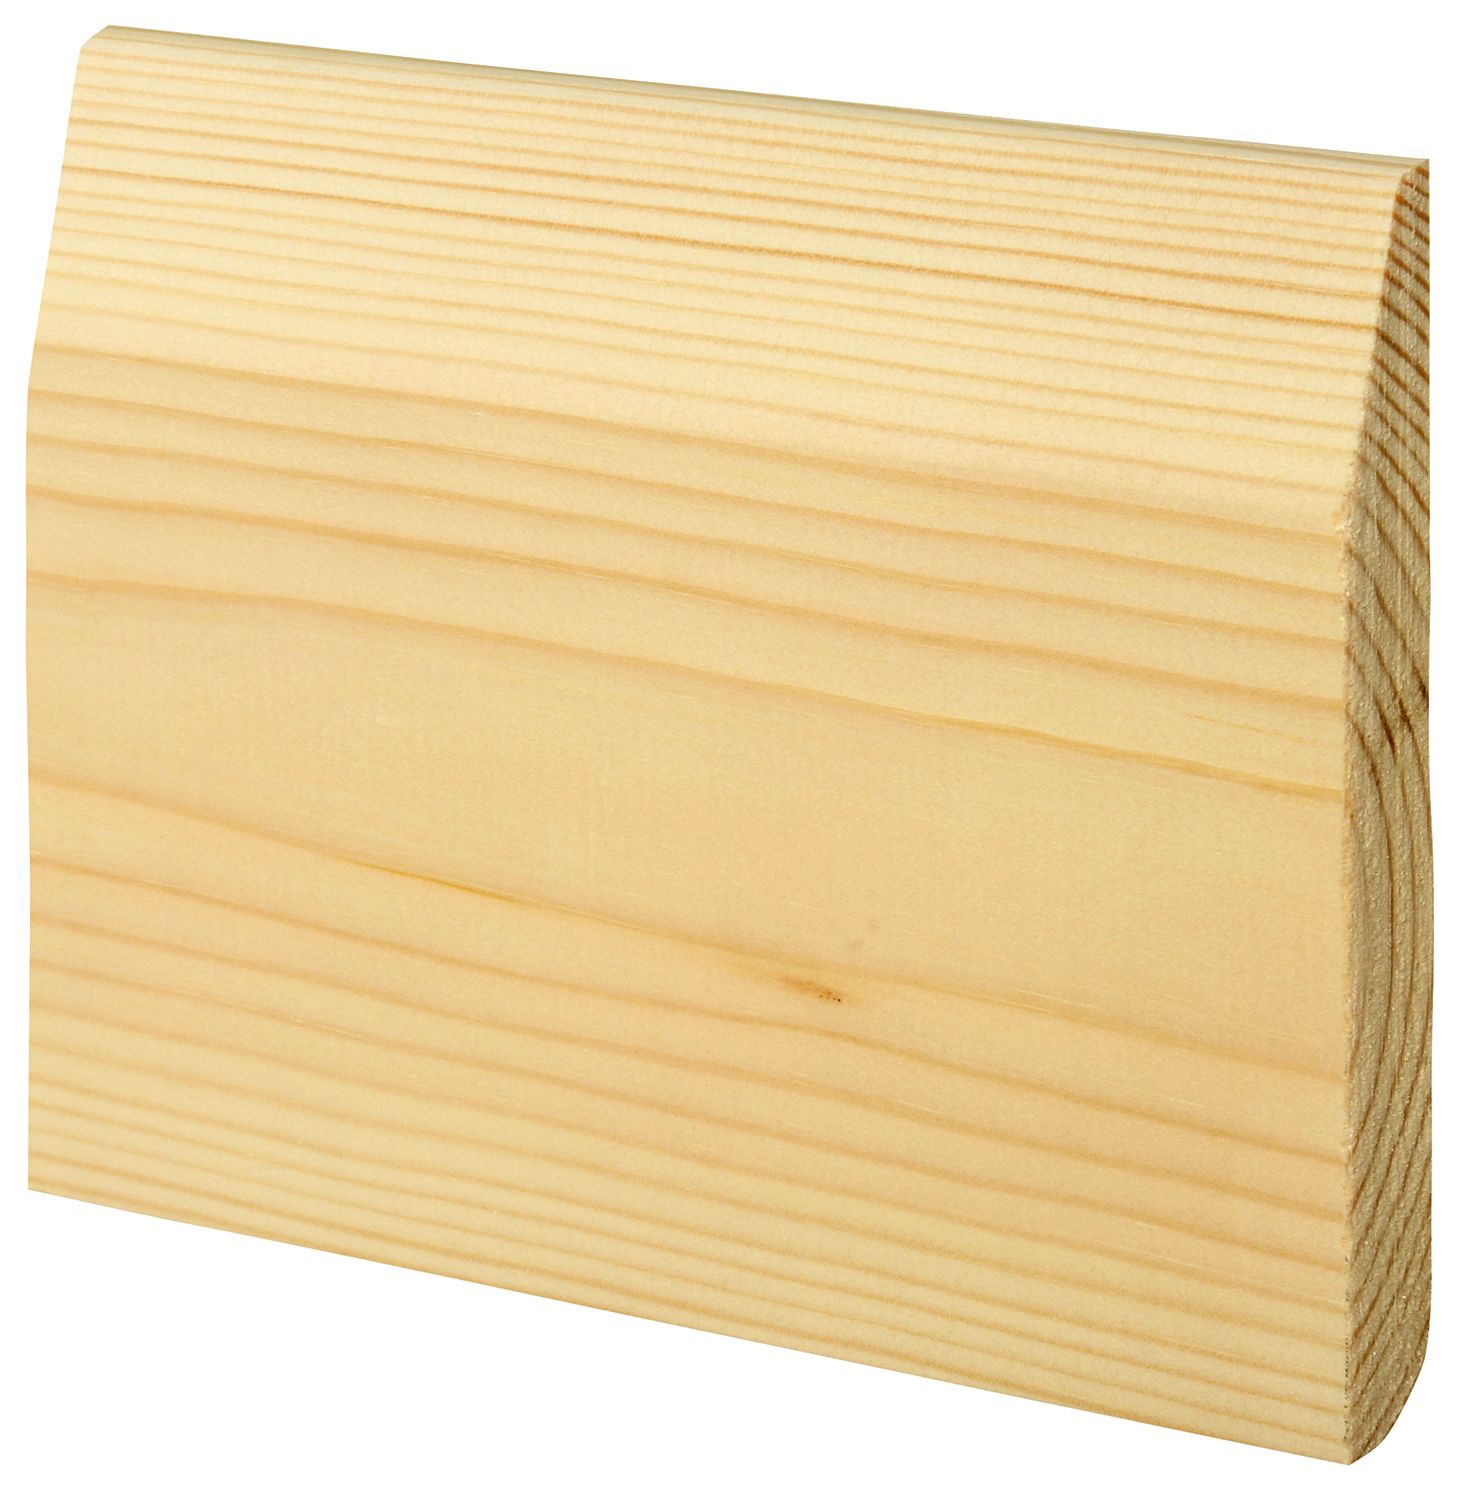 Image of Wickes Dual Purpose Chamfered/Bullnose Pine Skirting - 19 x 167 x 3600 mm